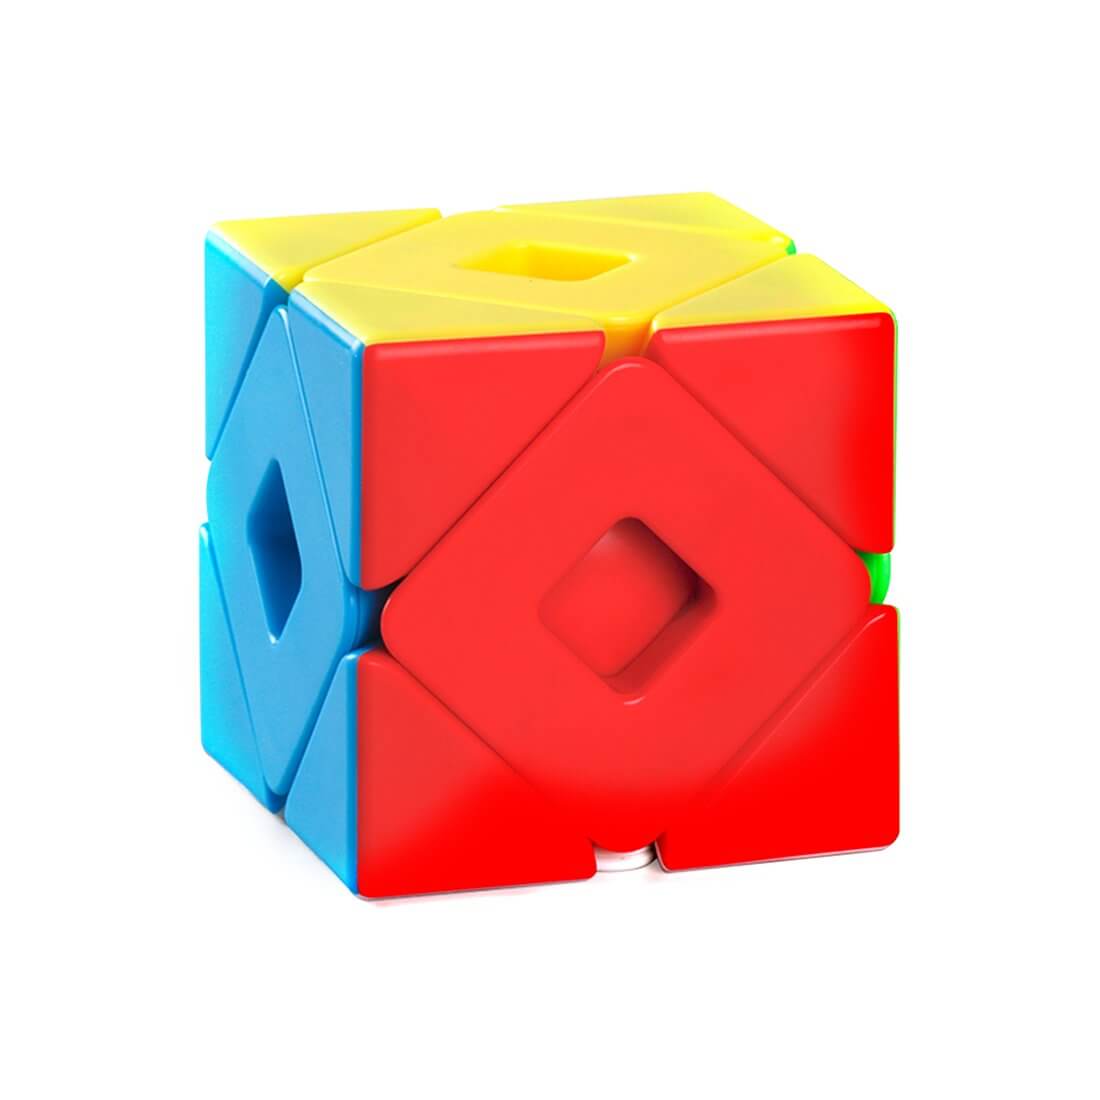 Which Moyu Skewb Cube is Your Favorite One?